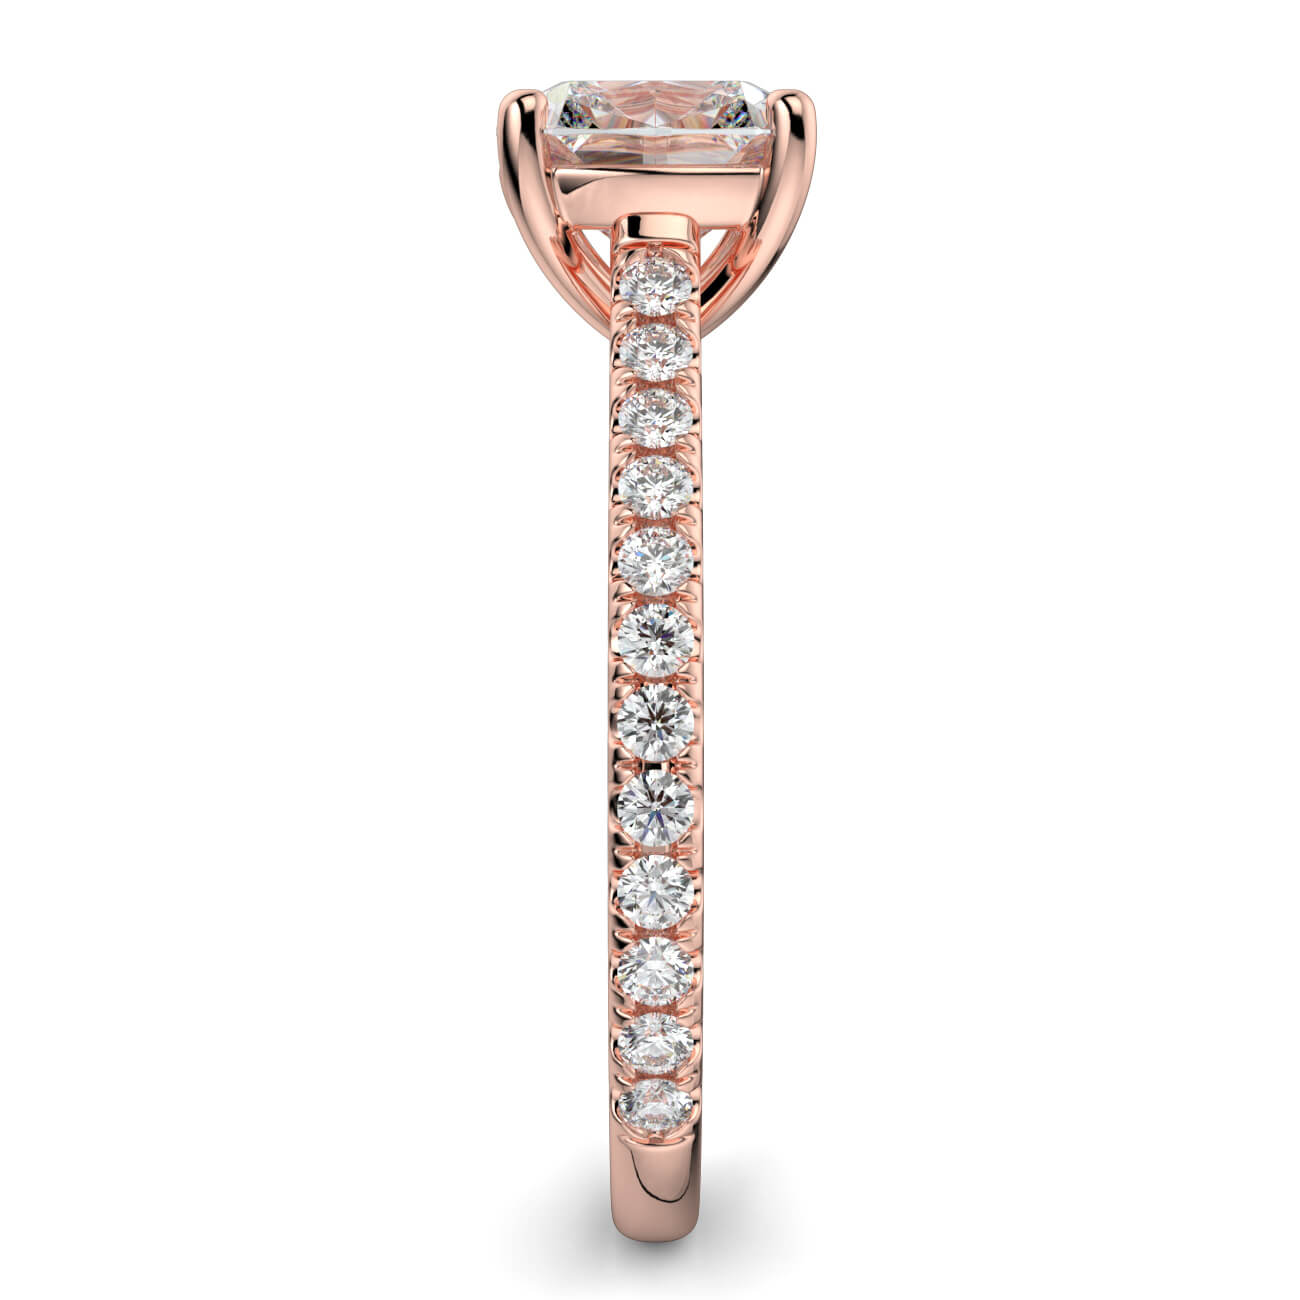 Cushion Cut diamond cathedral engagement ring in rose gold – Australian Diamond Network